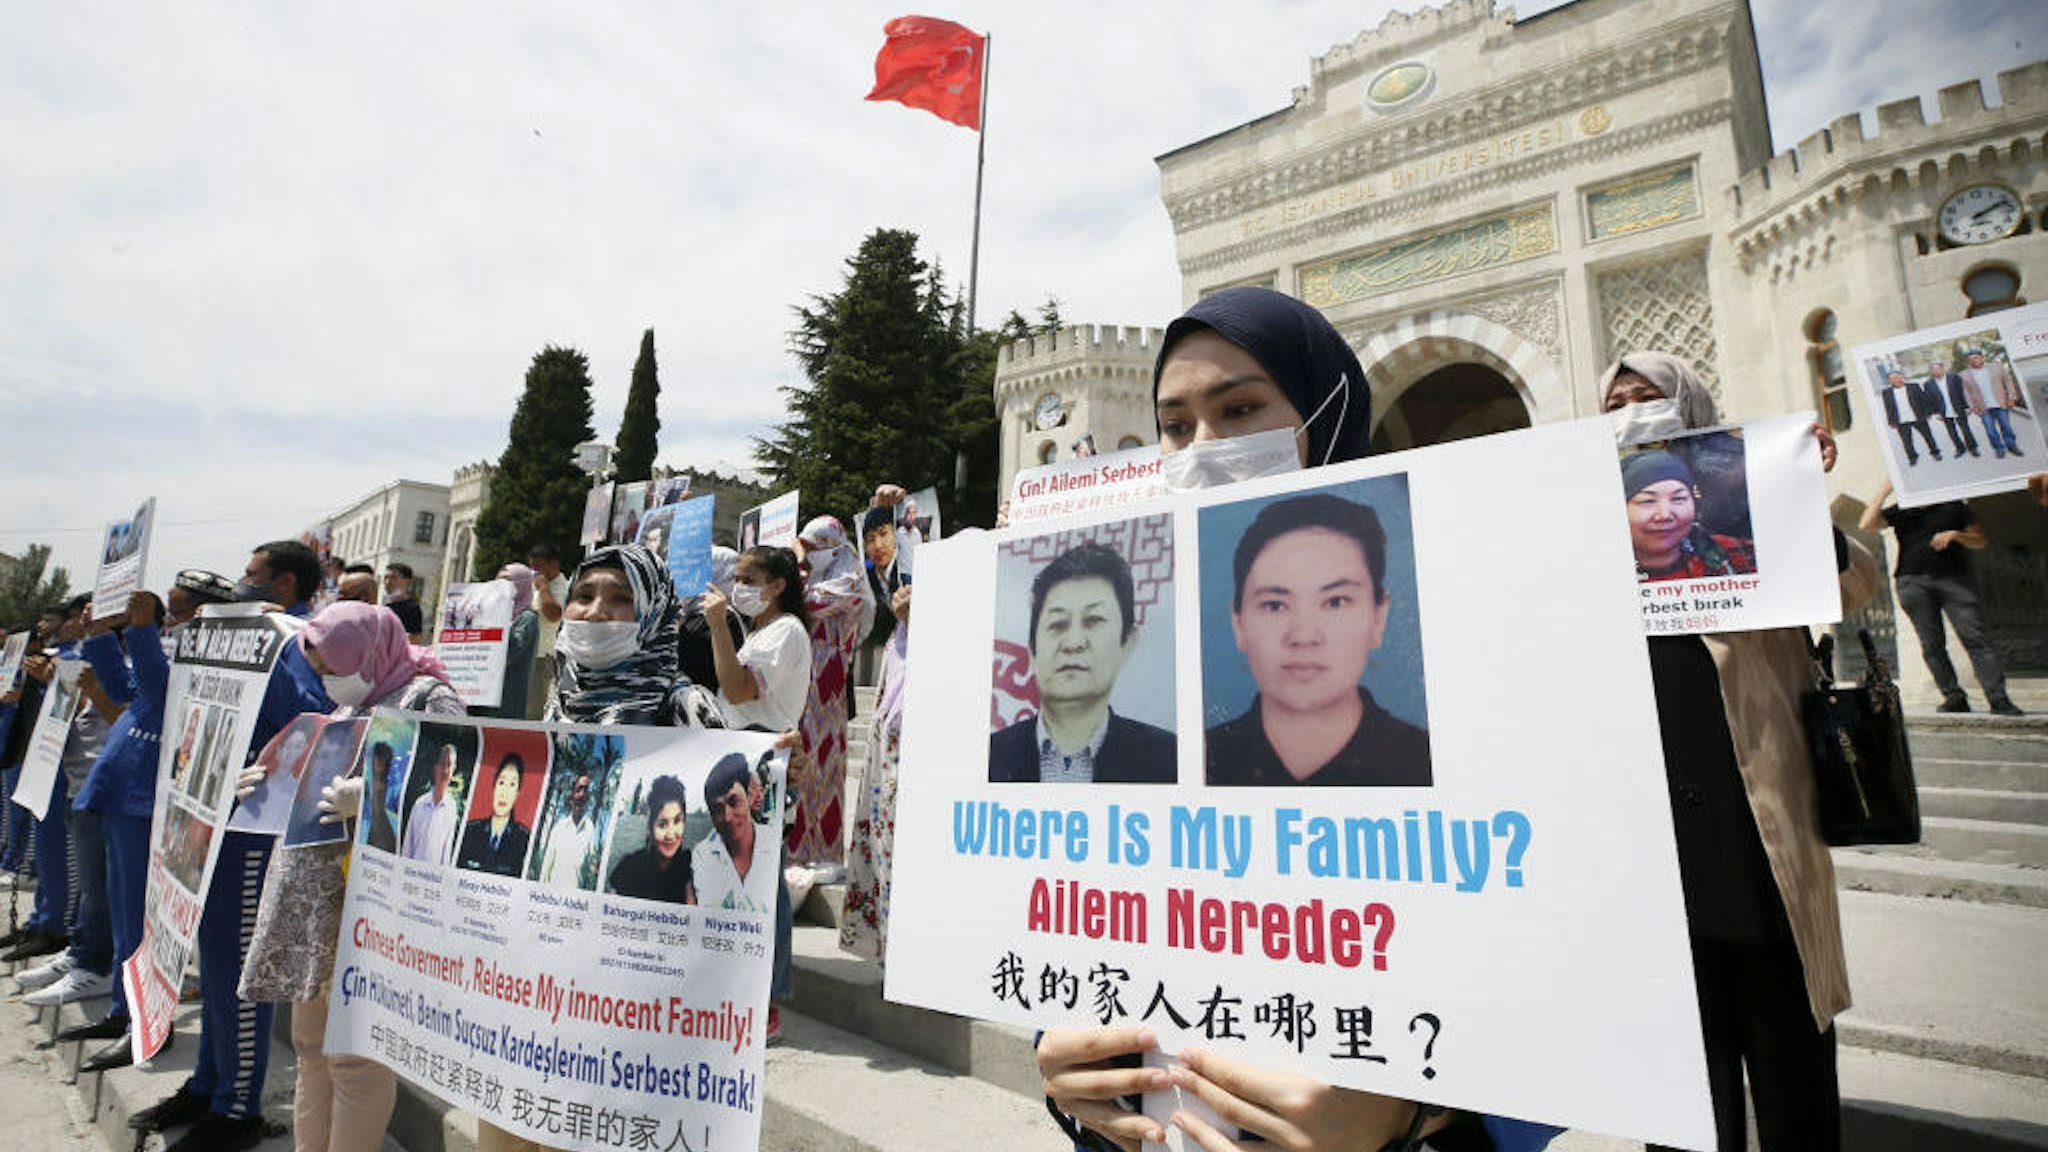 Uyghur Turks living in Istanbul gather to protest China for their family members, who have been held in Chinese camps, at Beyazit Square in Istanbul, Turkey on July 27, 2020. (Photo by Erhan Elaldi/Anadolu Agency via Getty Images)